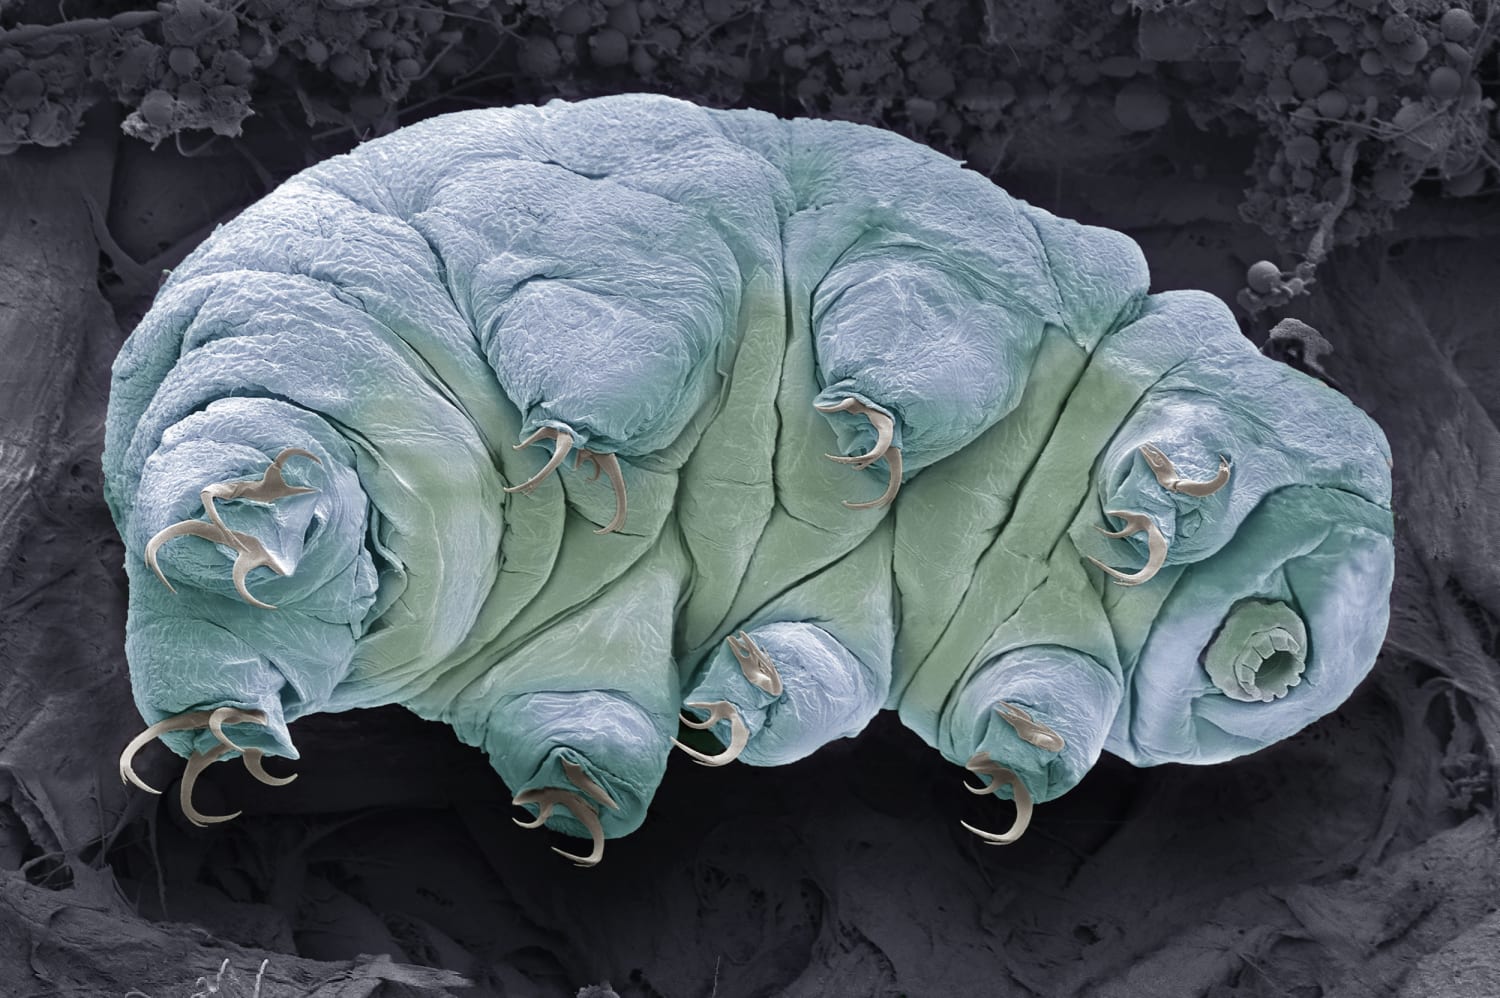 What is a tardigrade?